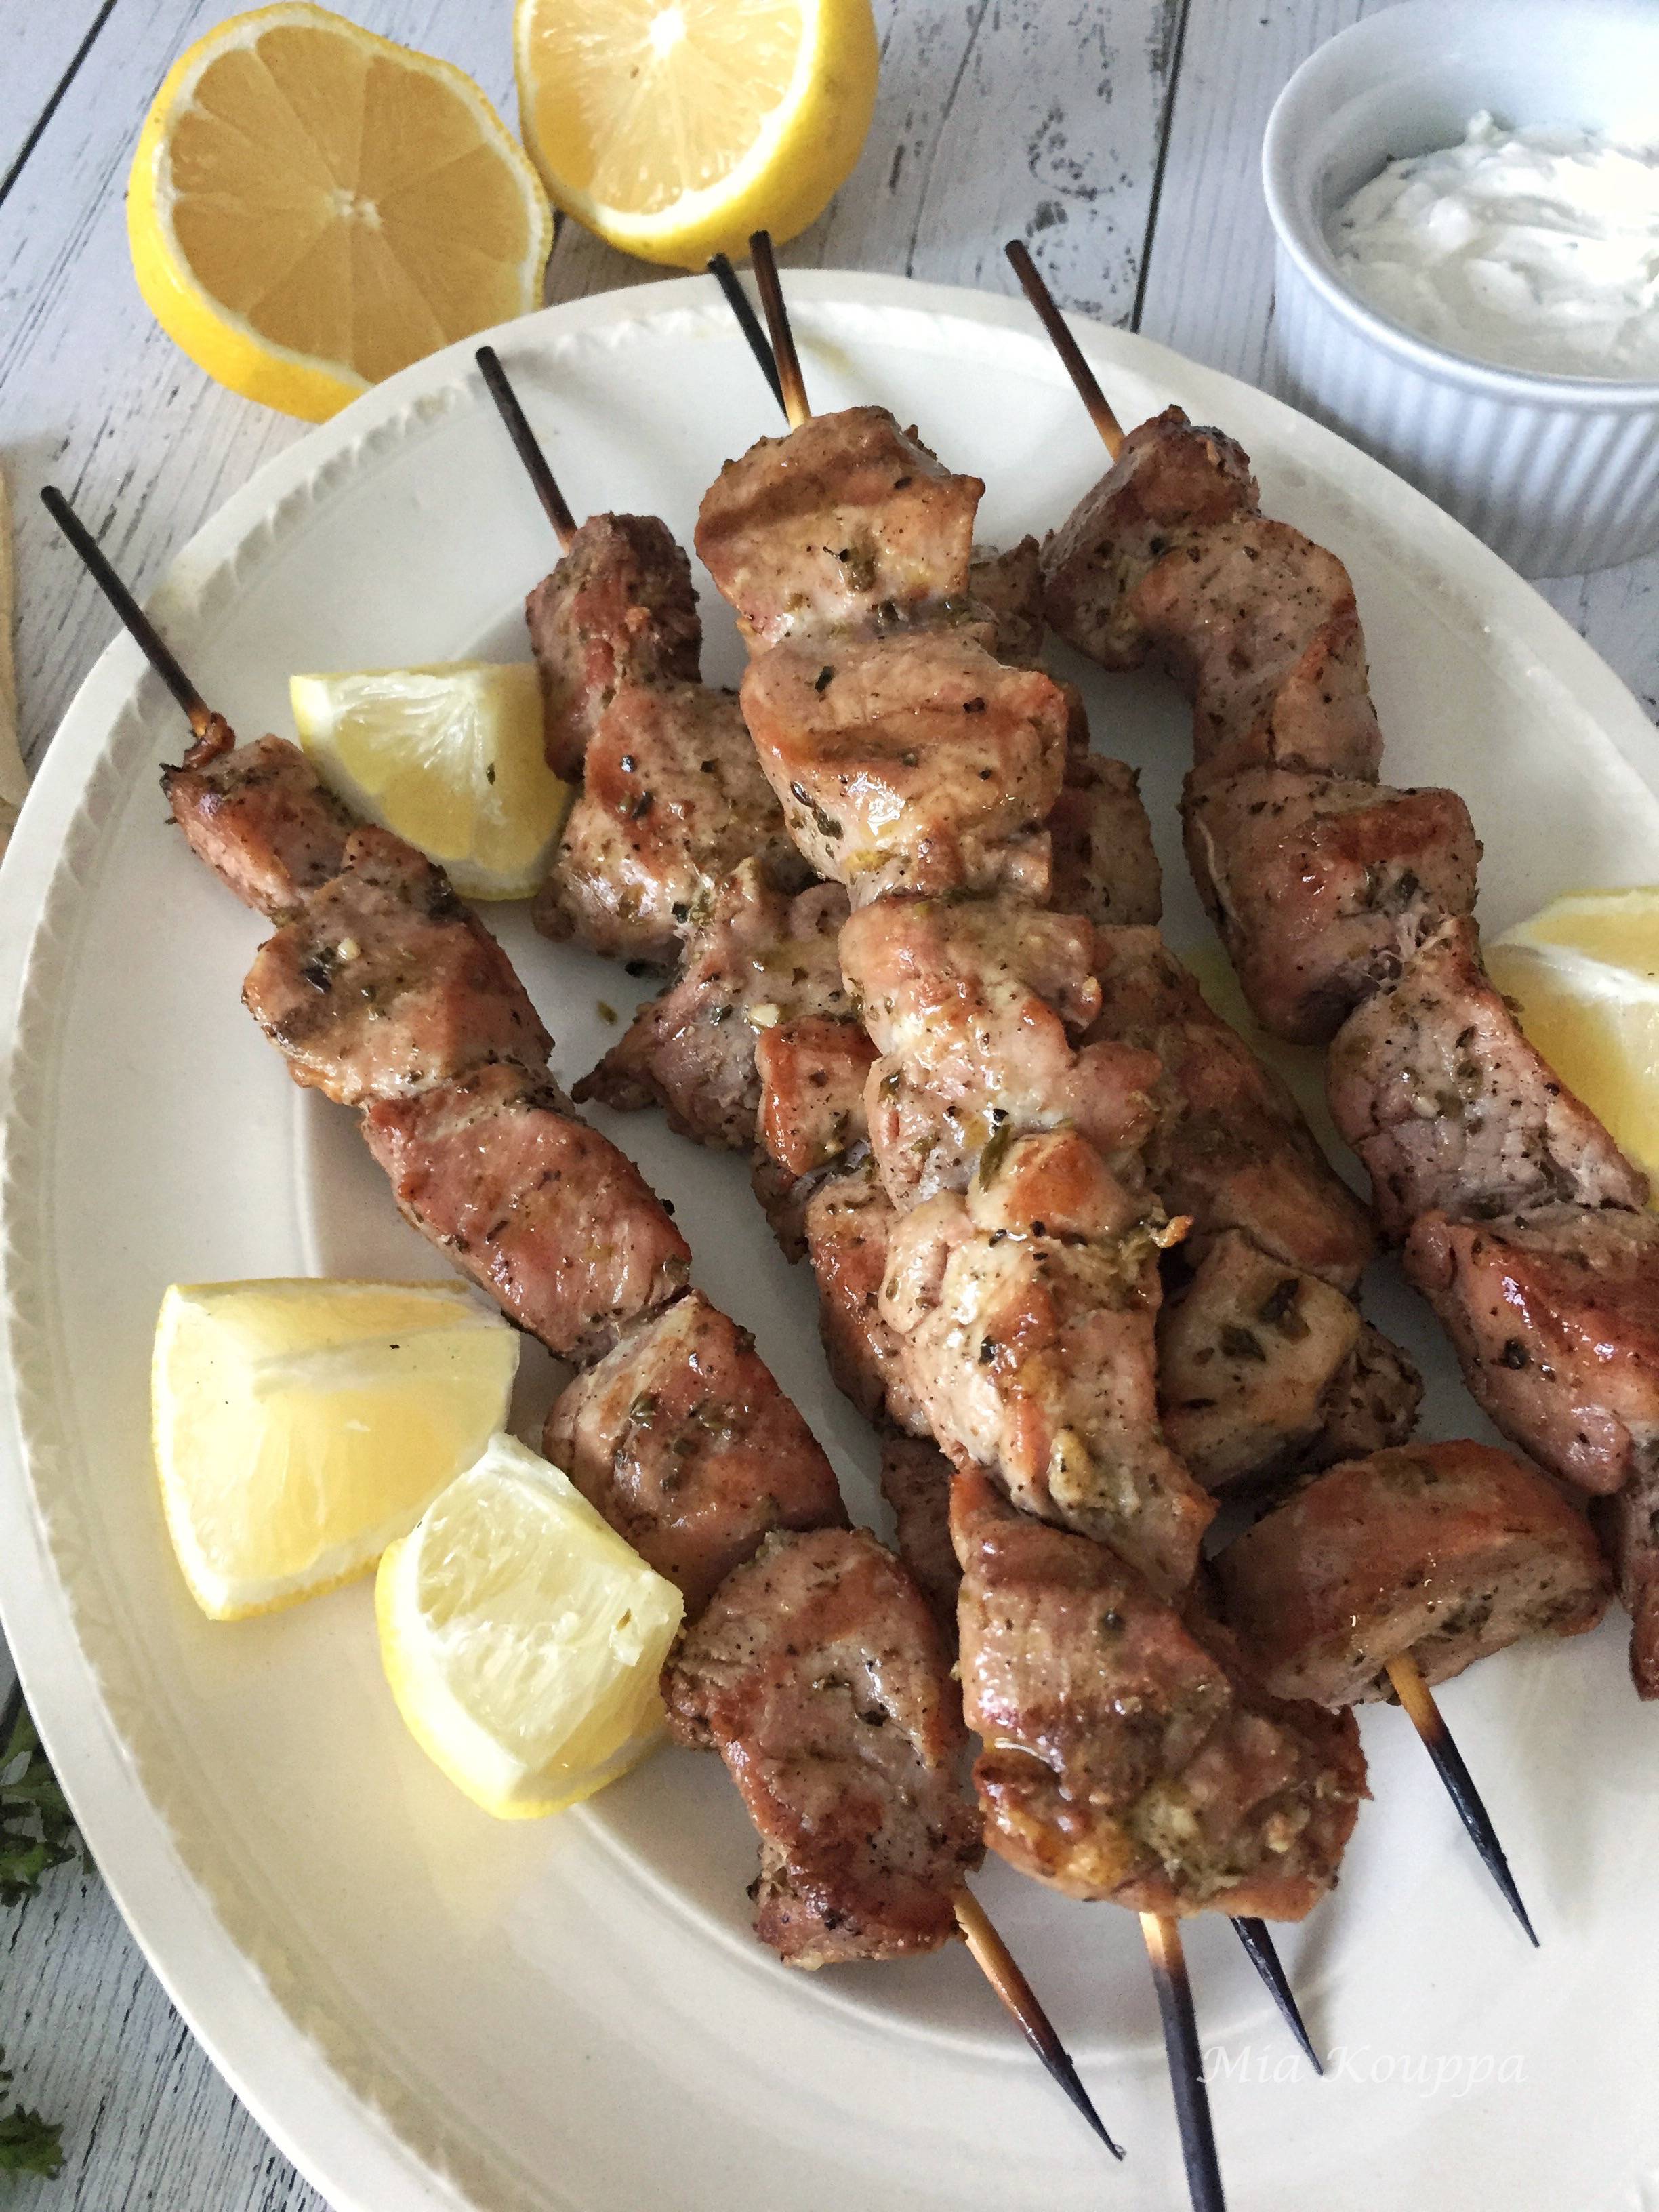 Grilled Pork souvlaki recipe. Marinated overnight, and deliciously flavourful and tender